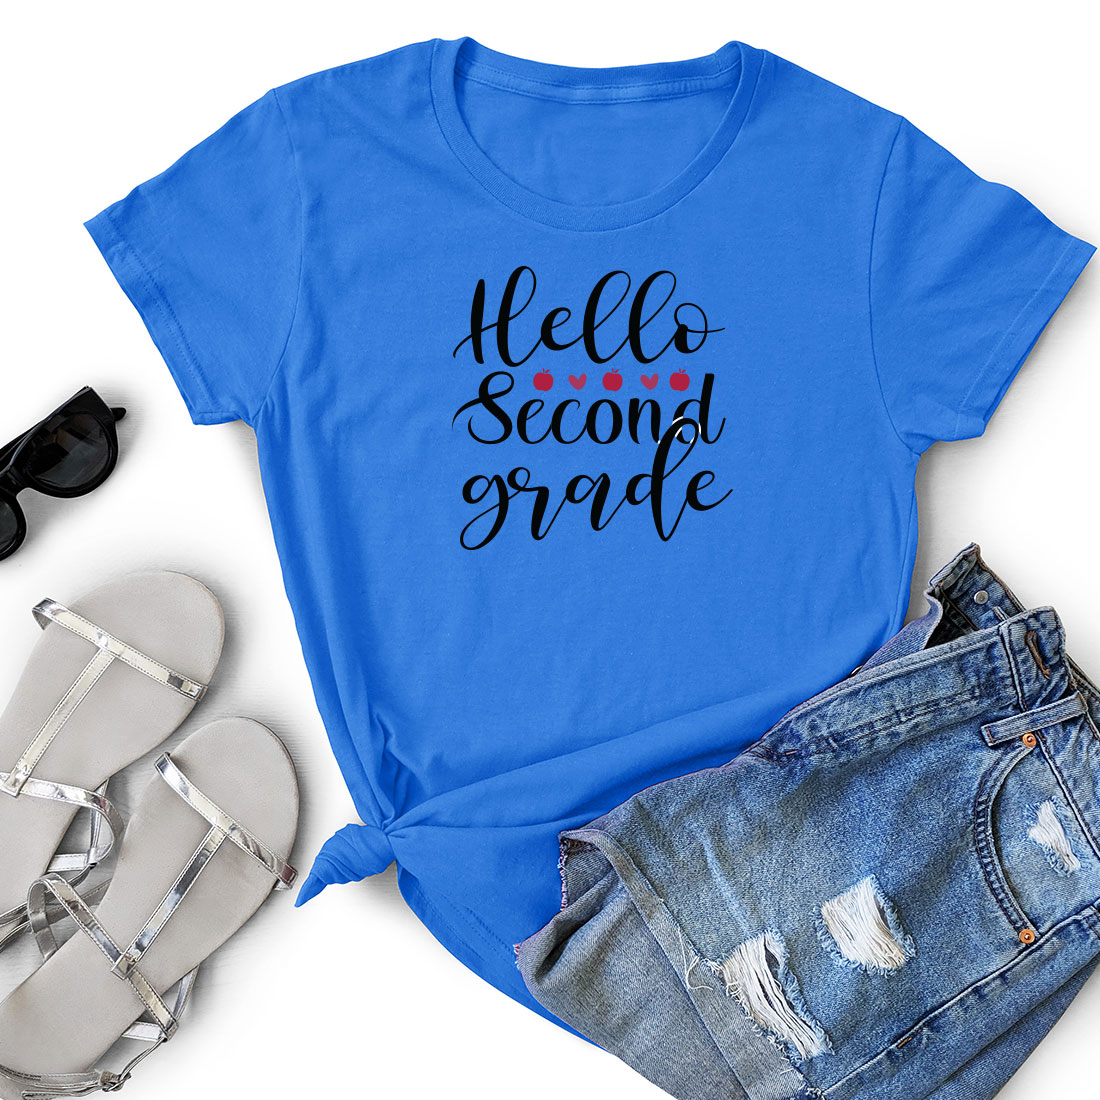 T - shirt that says hello second grade next to a pair of shorts.